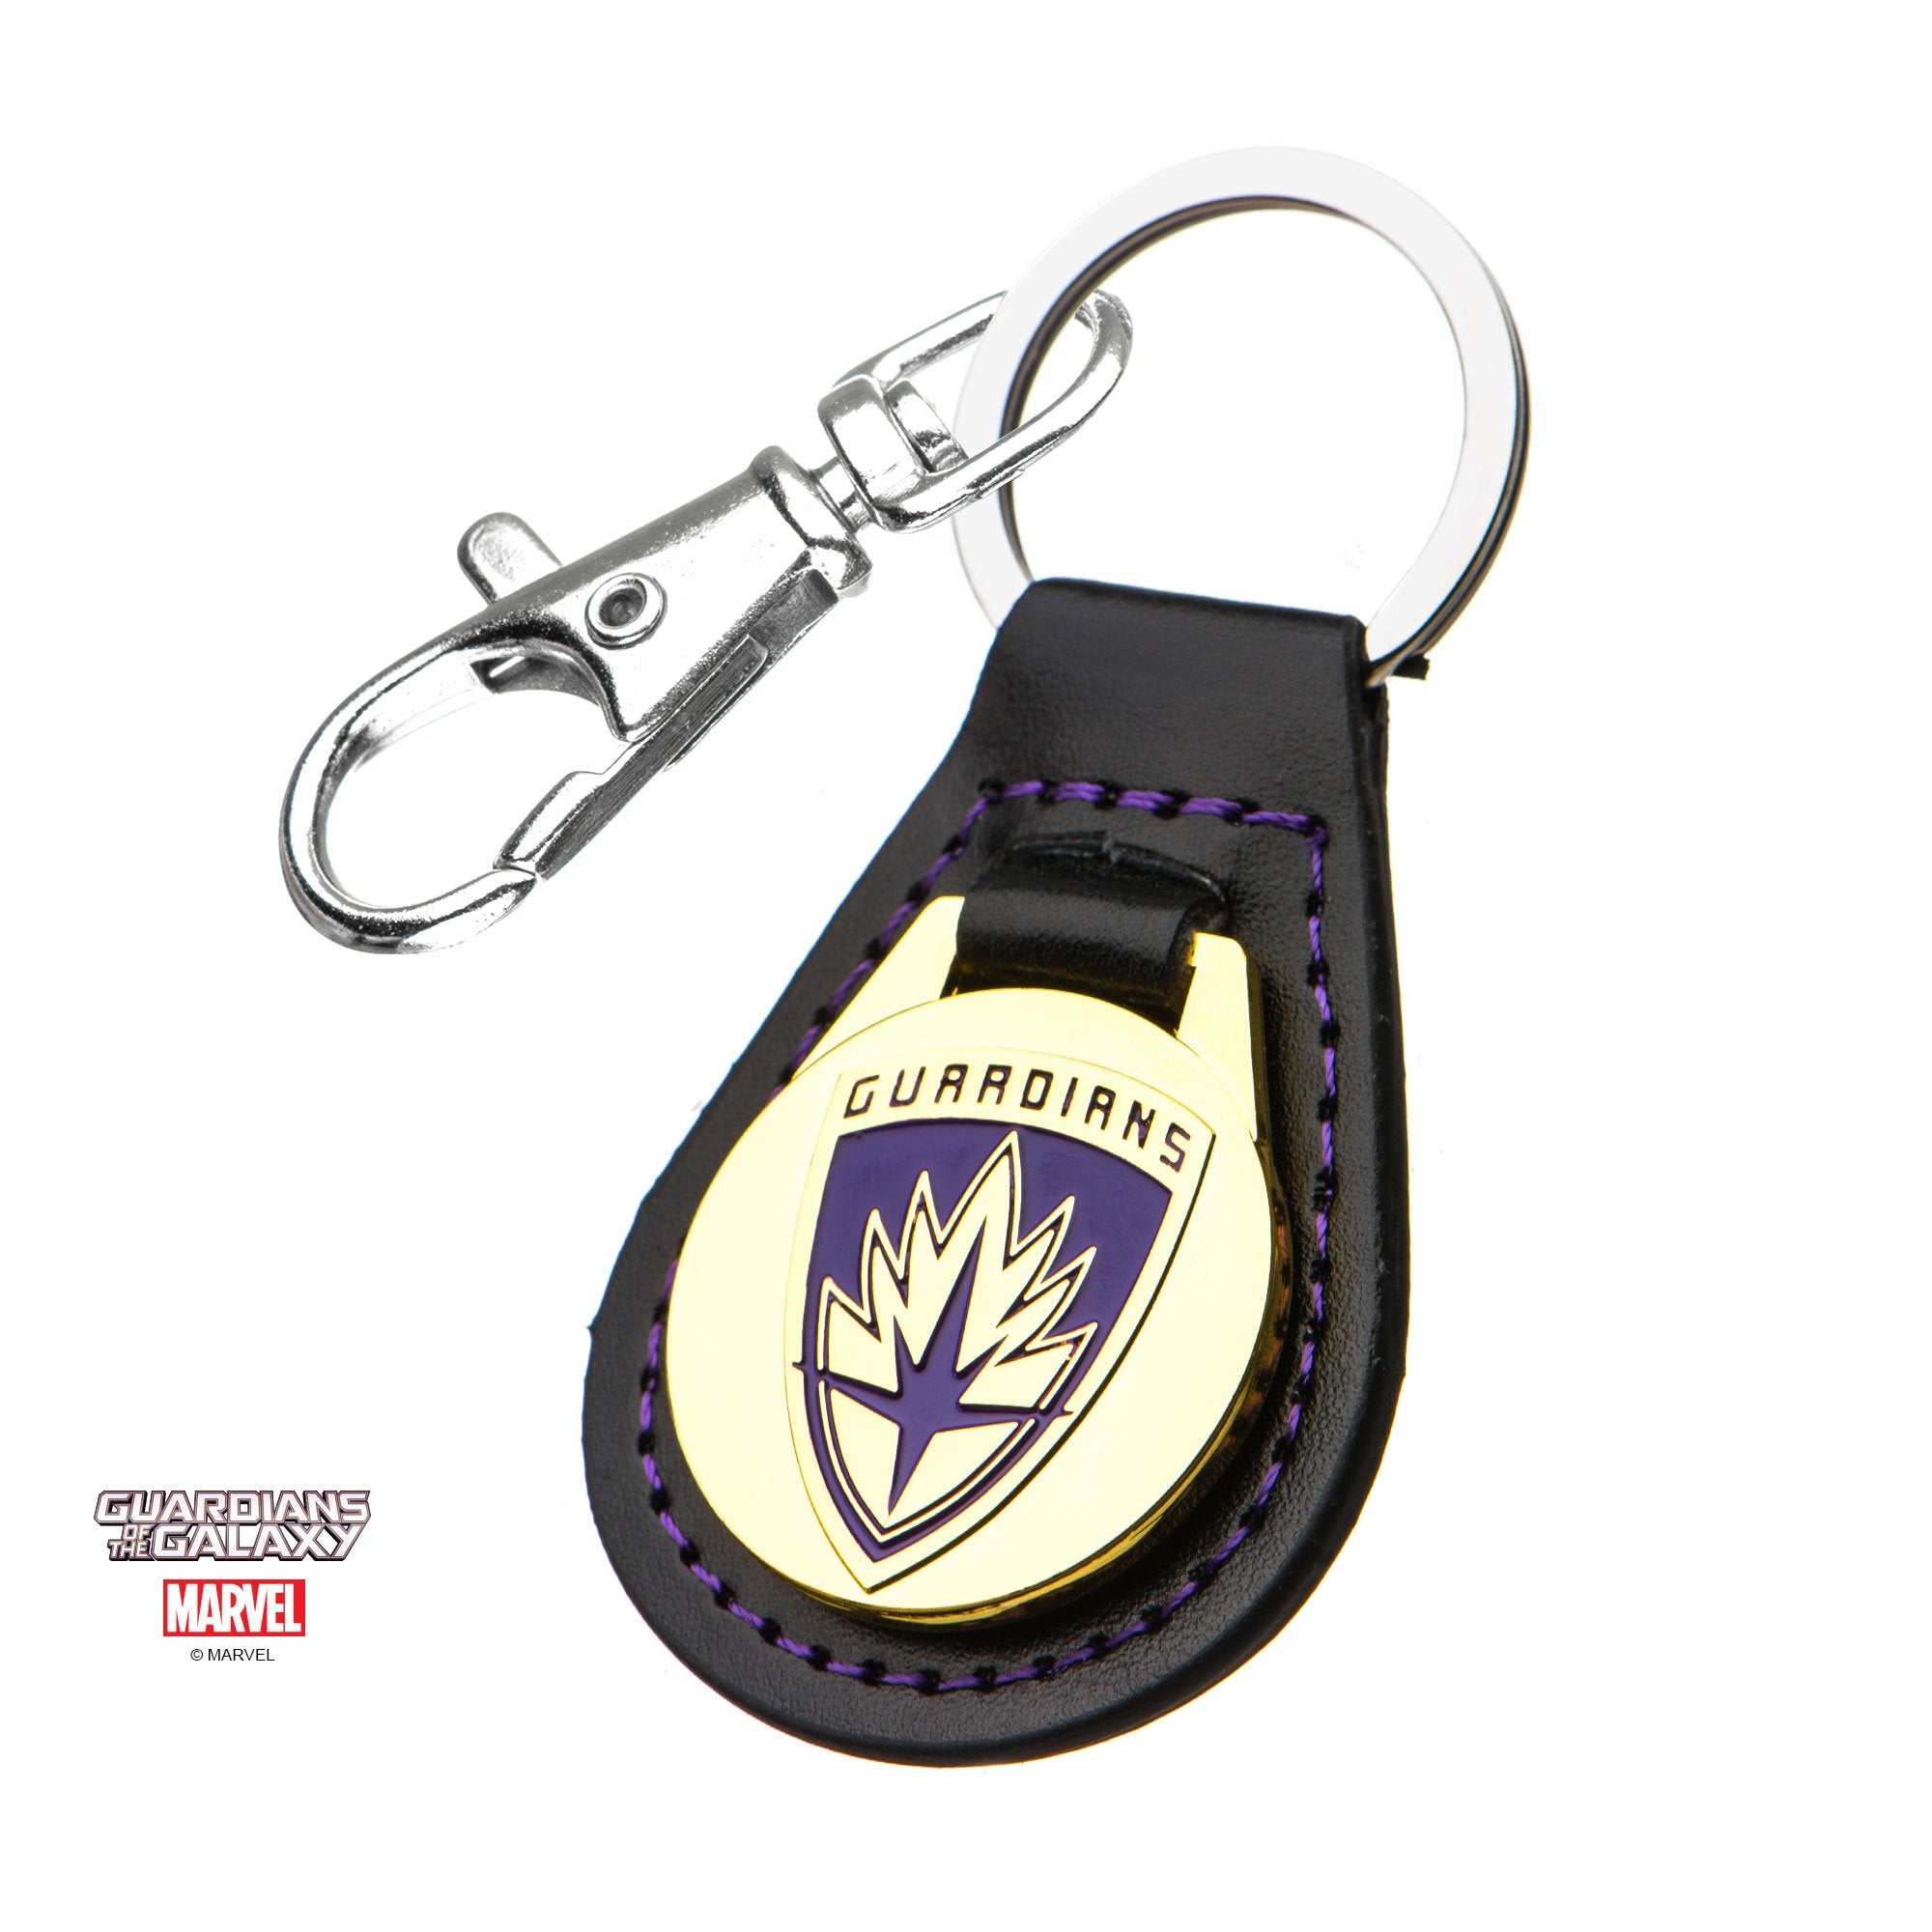 Marvel Guardians of the Galaxy Logo Leather Keychain